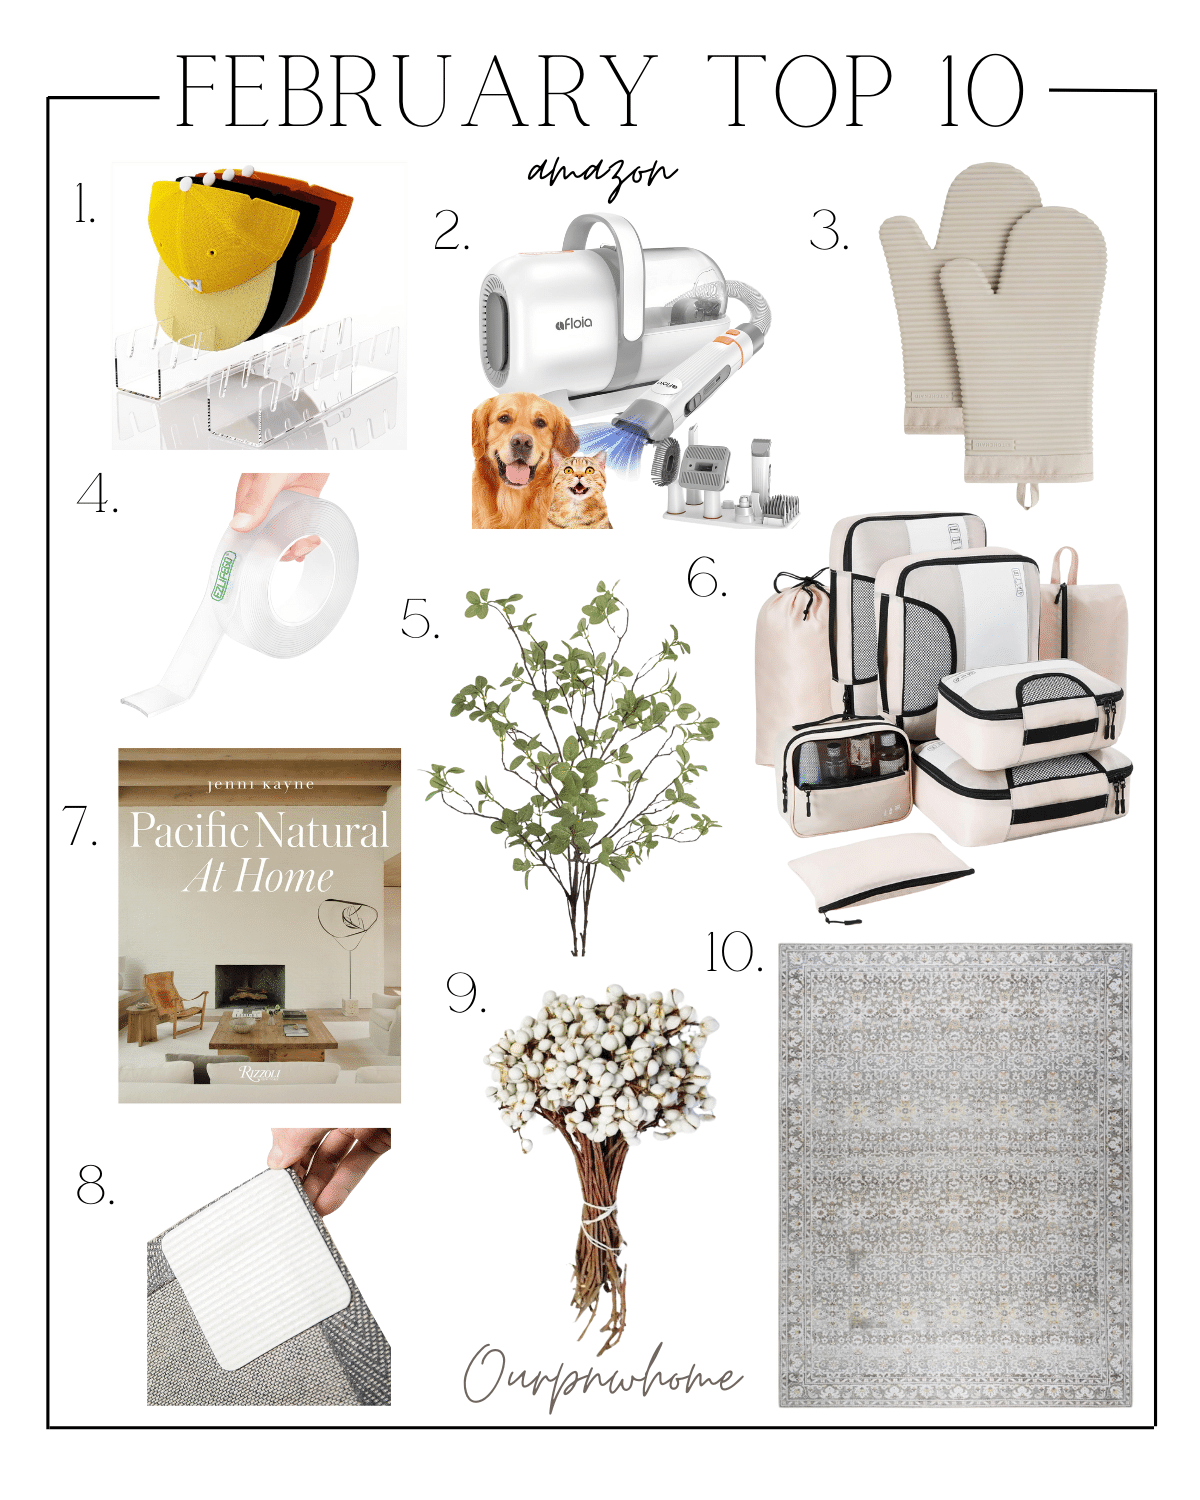 February's favorite home finds | February, monthly top seller, best seller, home, home decor, home finds, home favorites, organizer, spring cleaning, spring stems, spring decor, kitchen, coffee table book, area rug, packing, travel, travel essentials